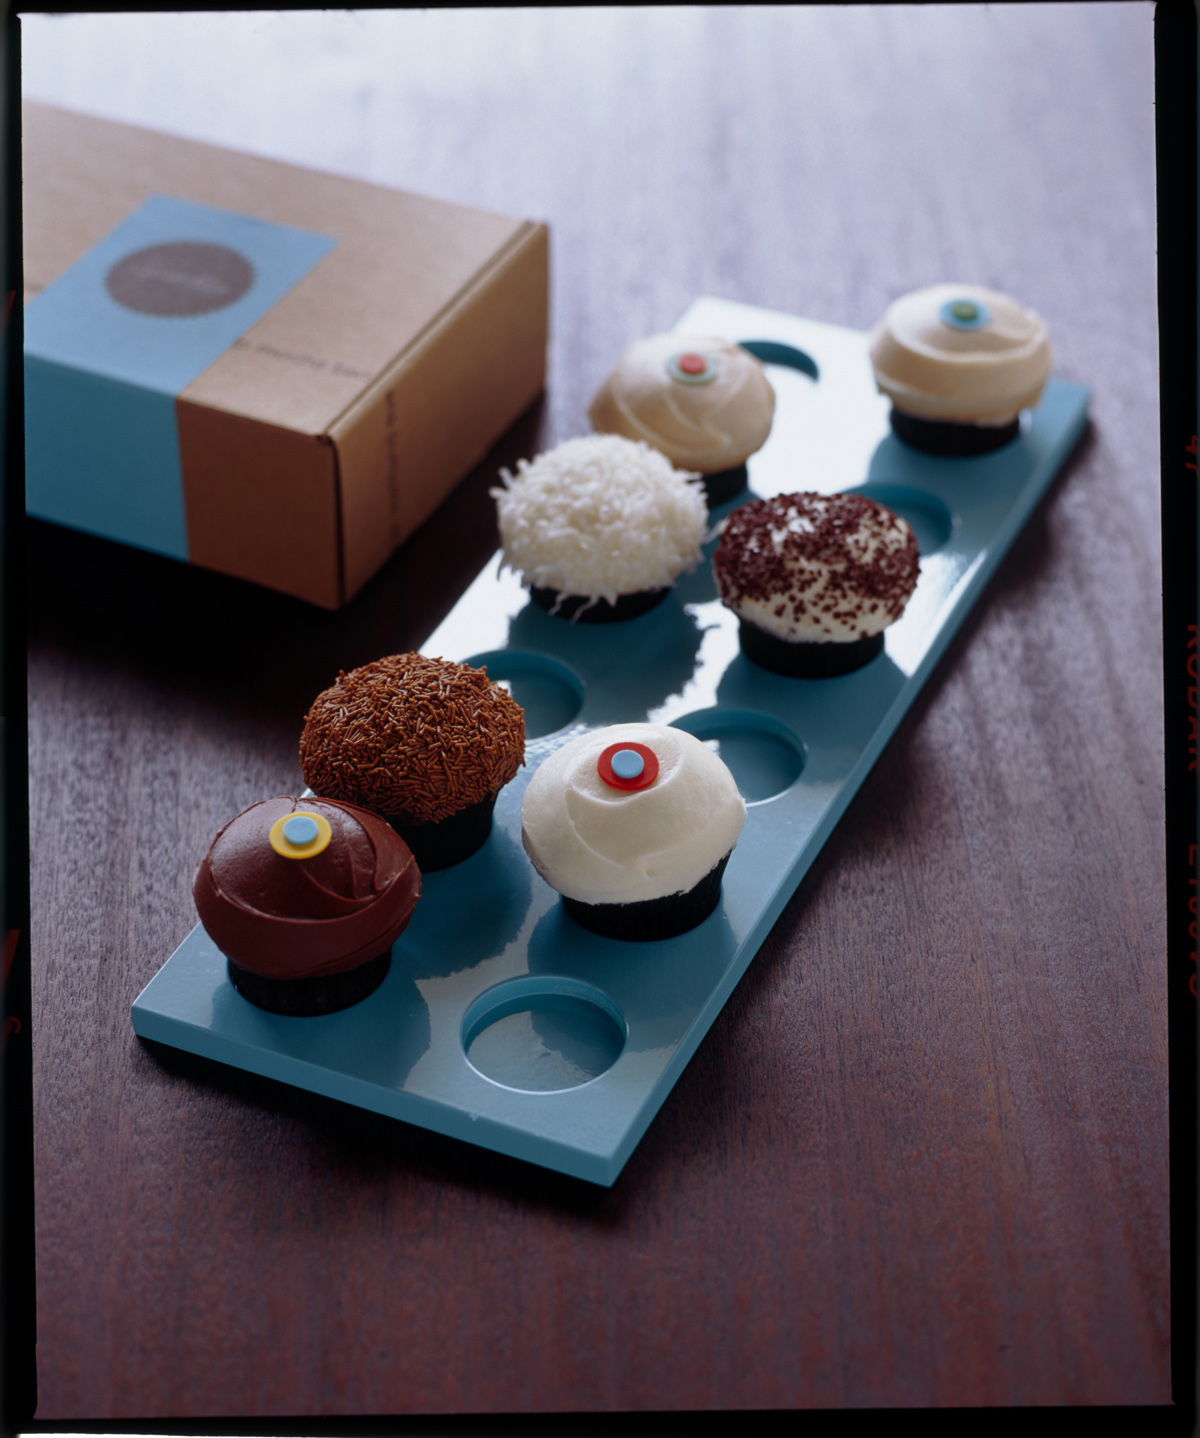 One for me...one for you...one for me...(Photo courtesy of Sprinkles Cupcakes)